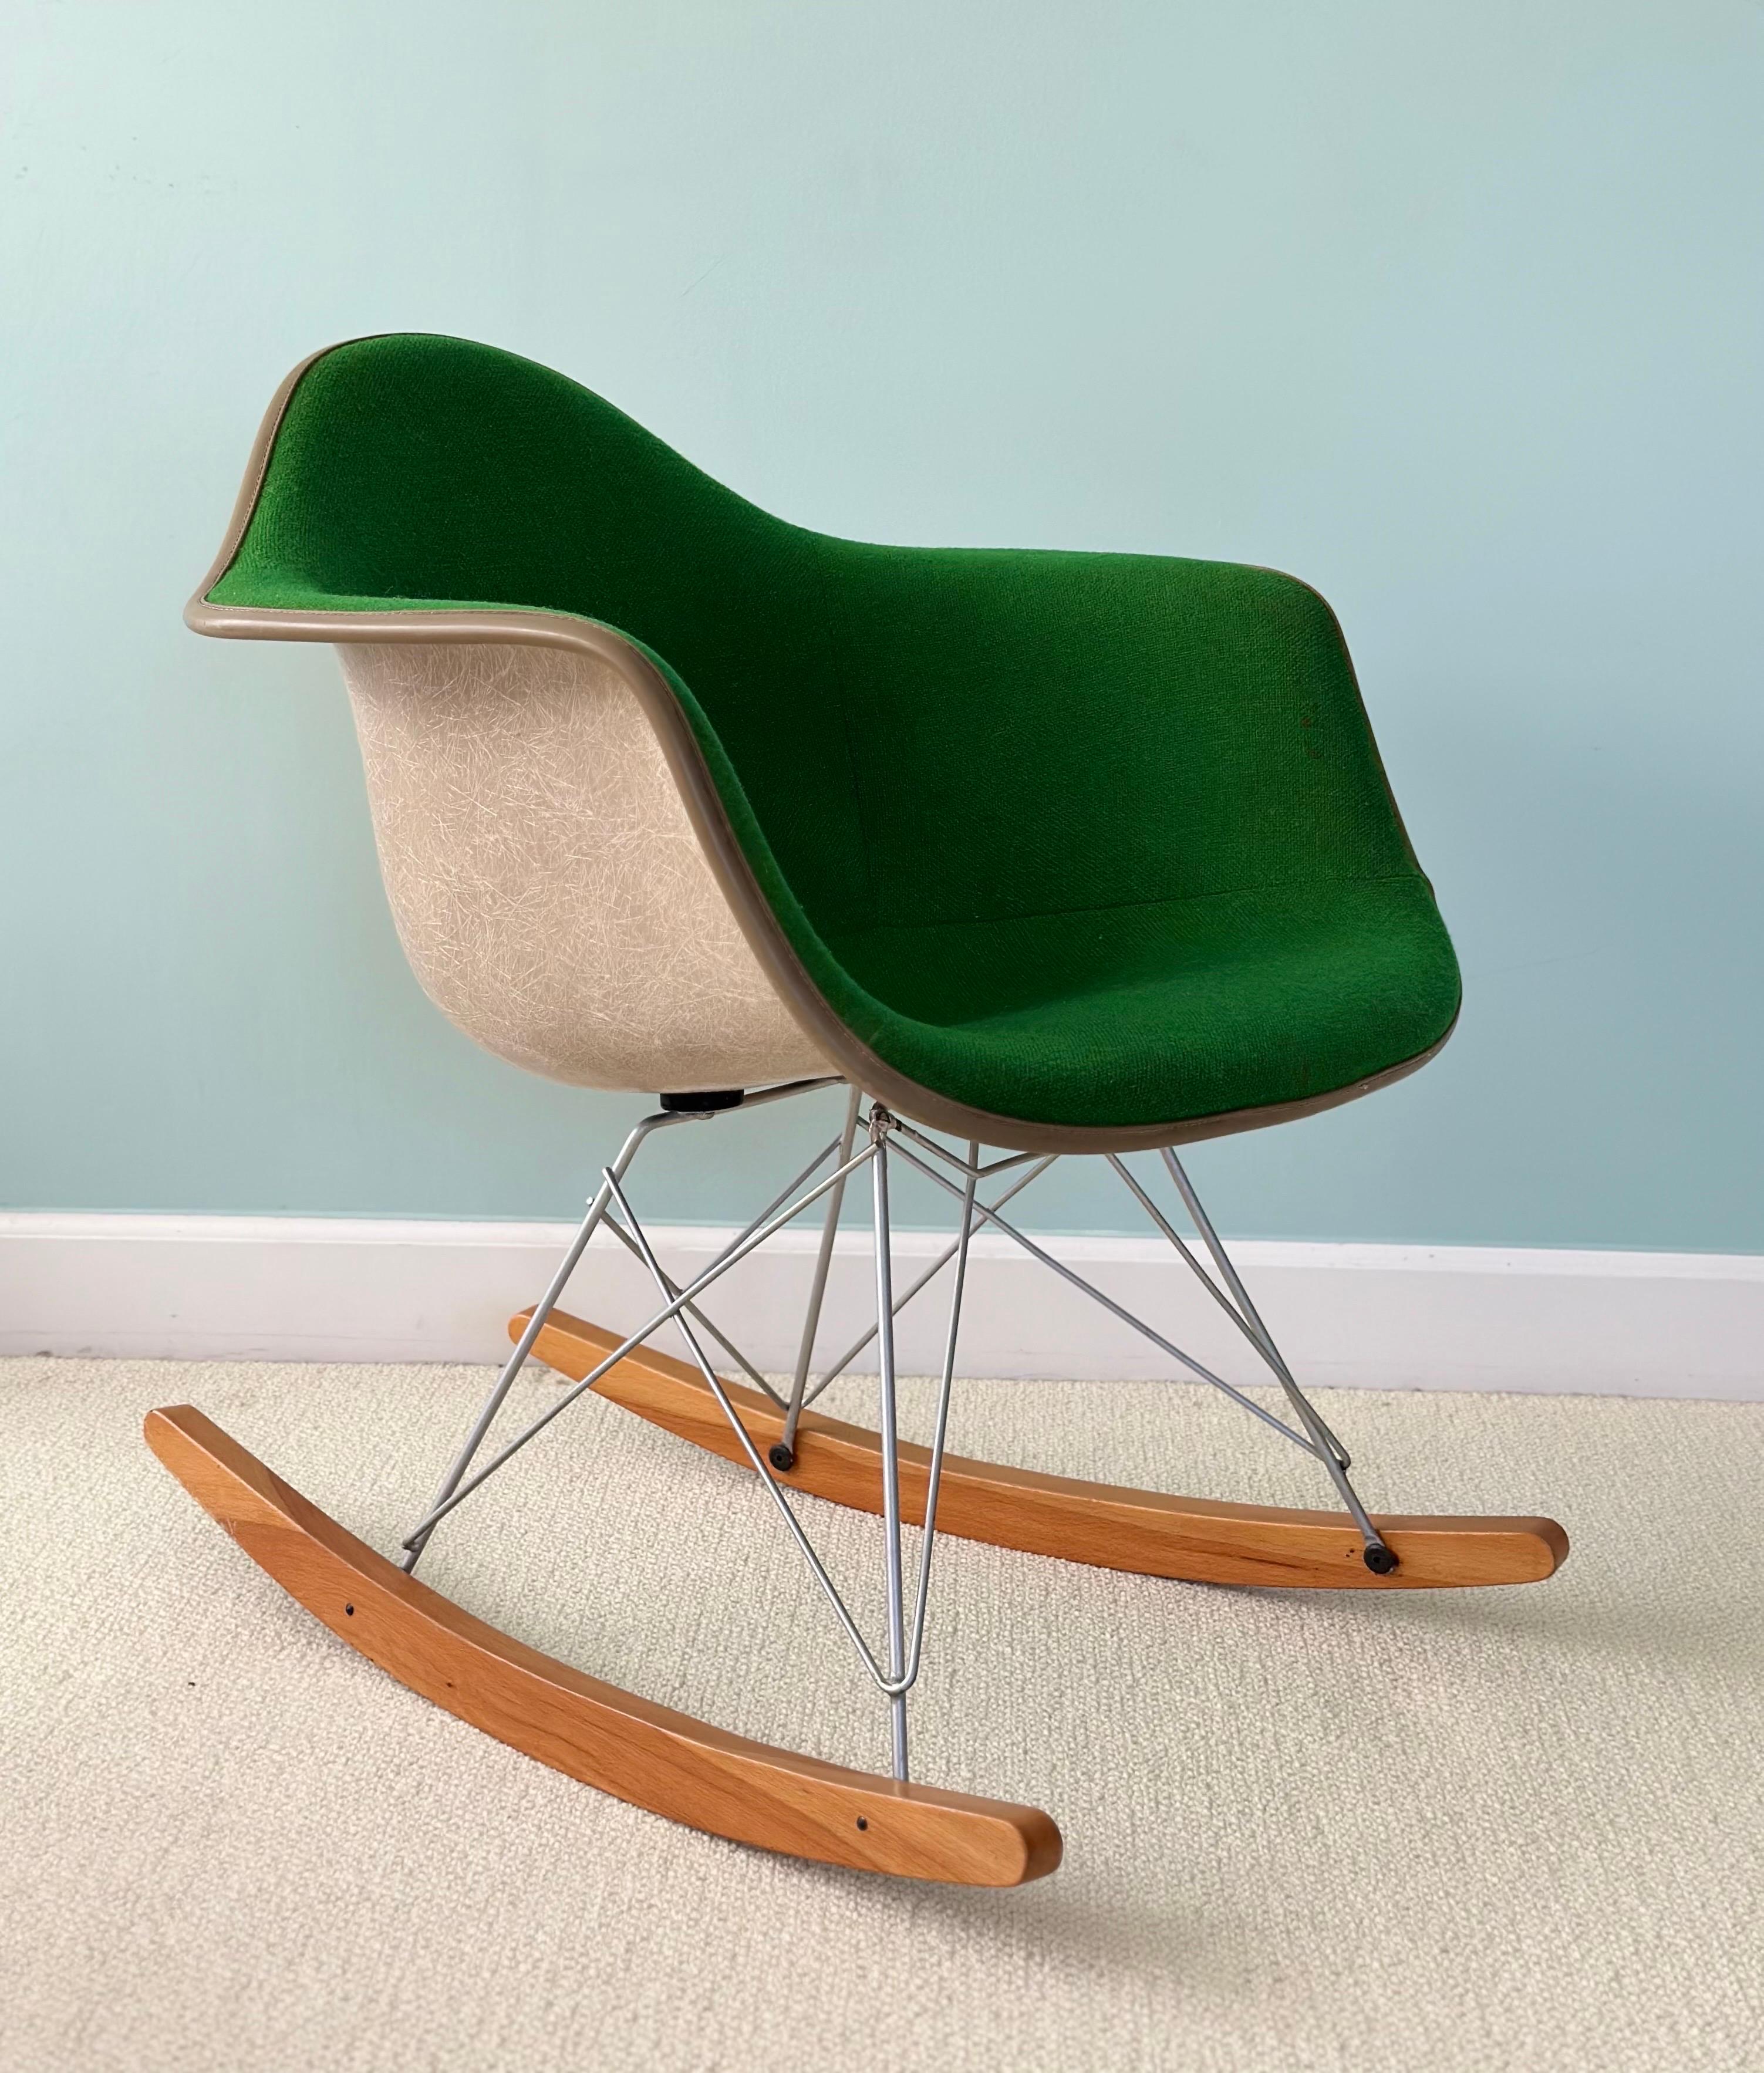 We are very pleased to offer a vintage rocking chair by Herman Miller, circa the 1970s.  The RAR Rocking Chair crafted by the iconic design duo, Charles and Ray Eames, was introduced in the 1950s and further became a symbol of Mid-century modern